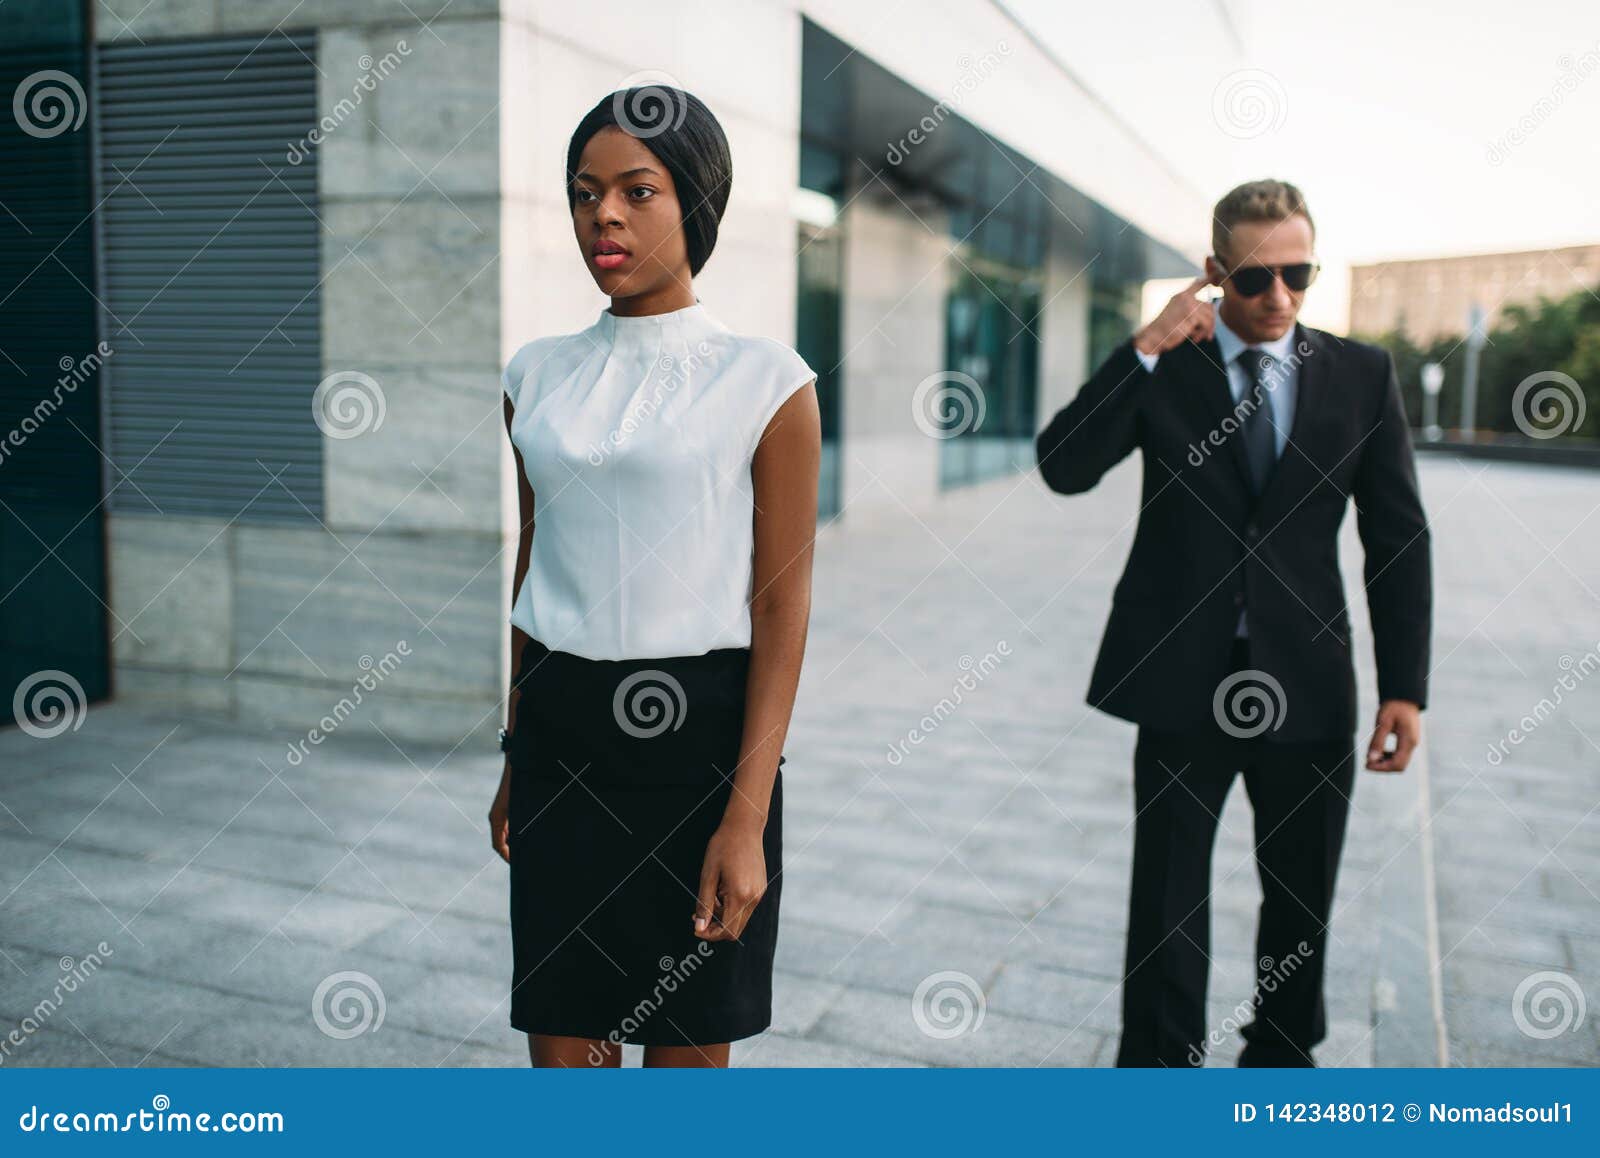 Serious Bodyguard Standing with Sunglasses and Security Earpiece